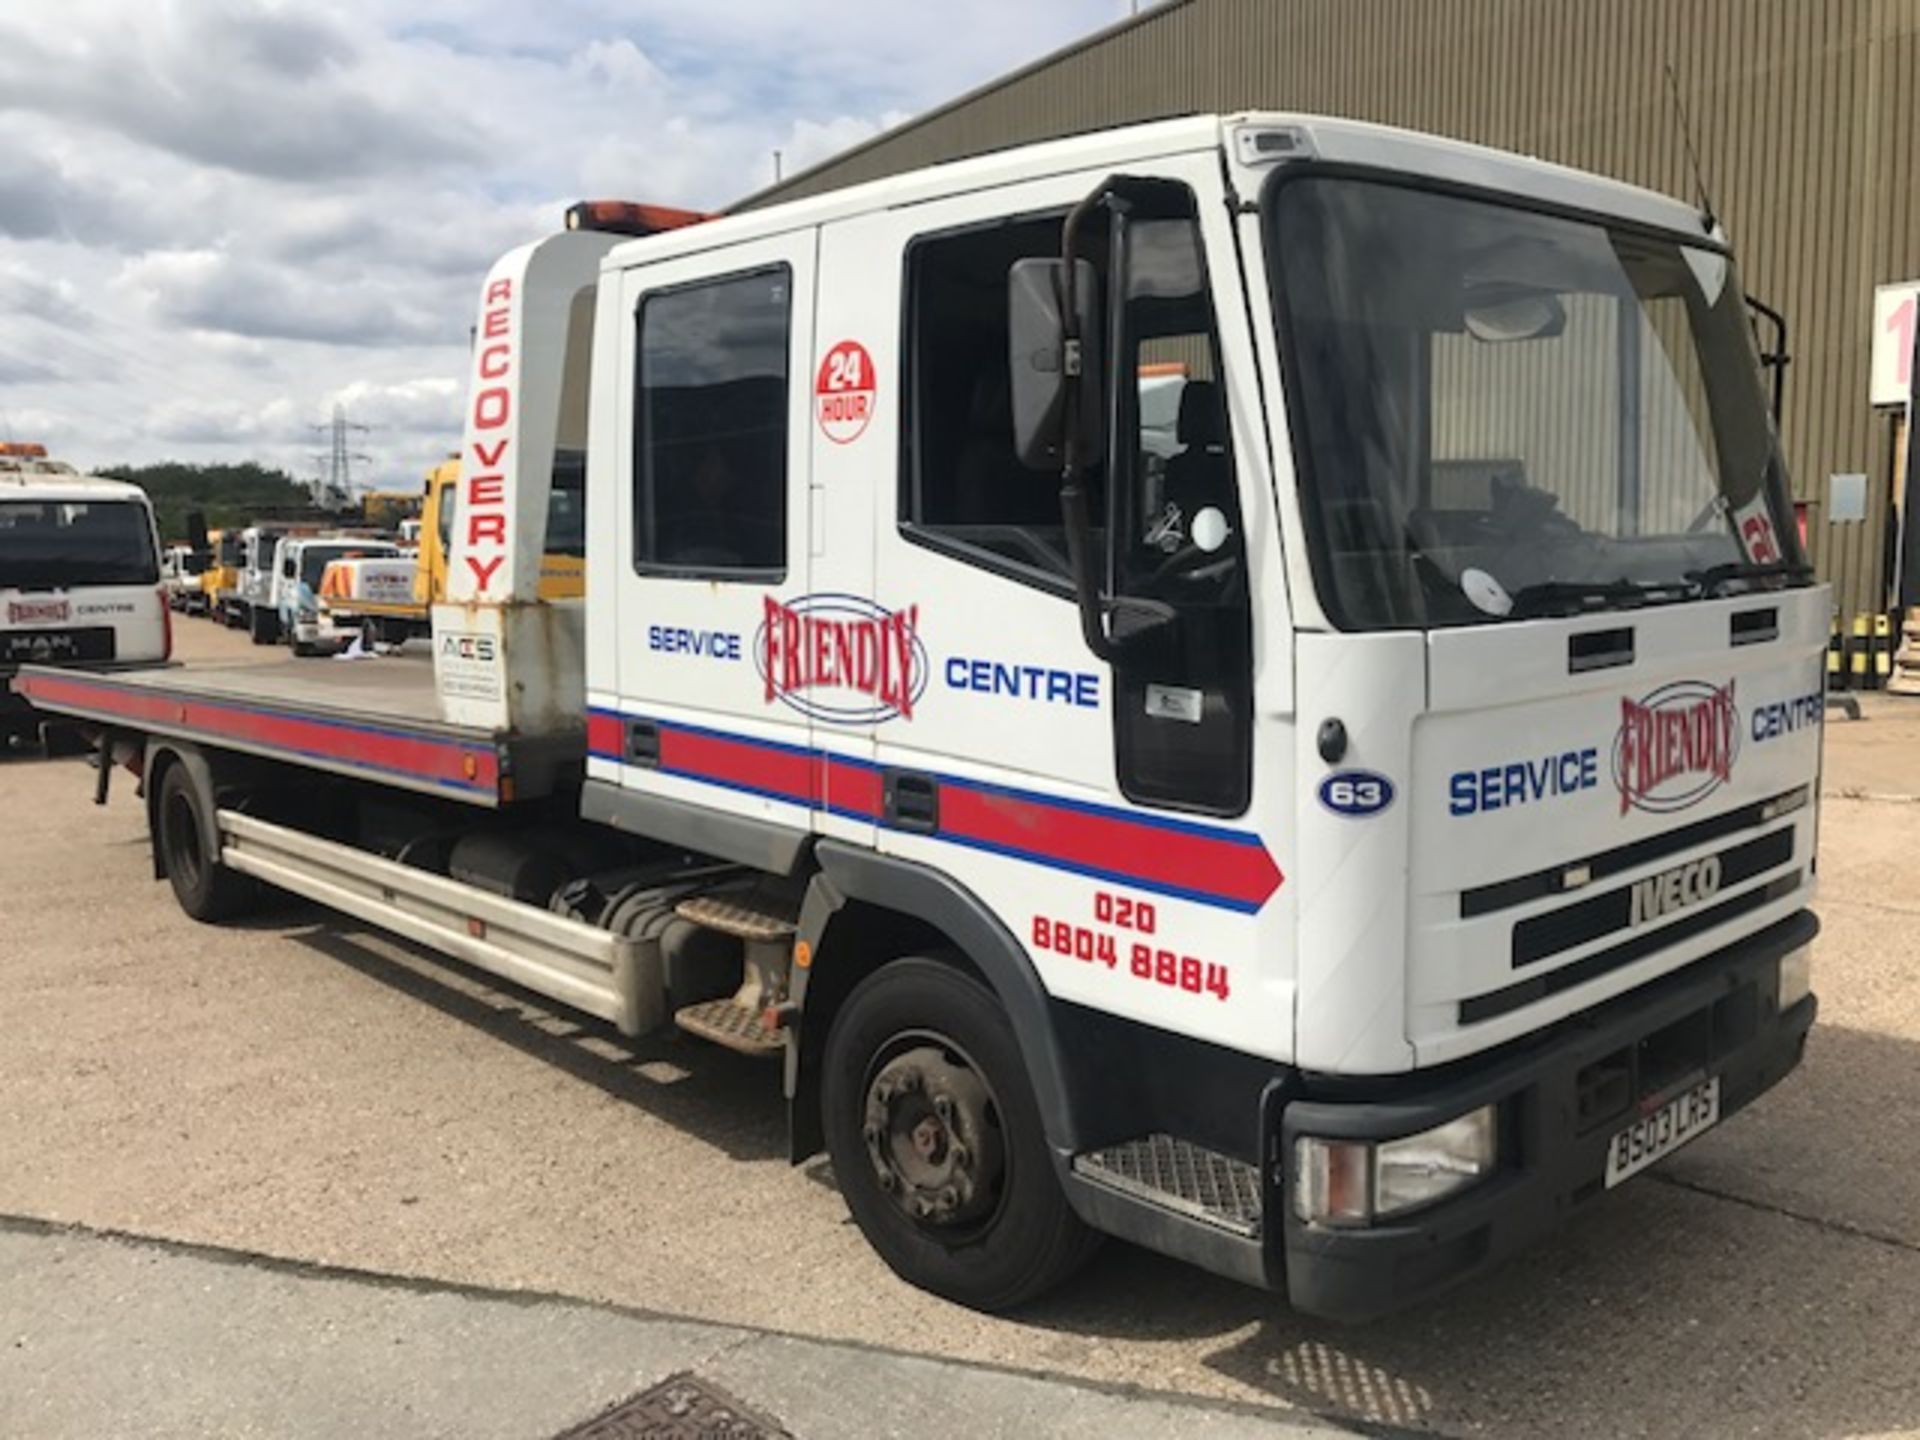 2003 Iveco Ford Tector ML100 E21D10T crew cab breakdown recovery vehicle complete with Garmin